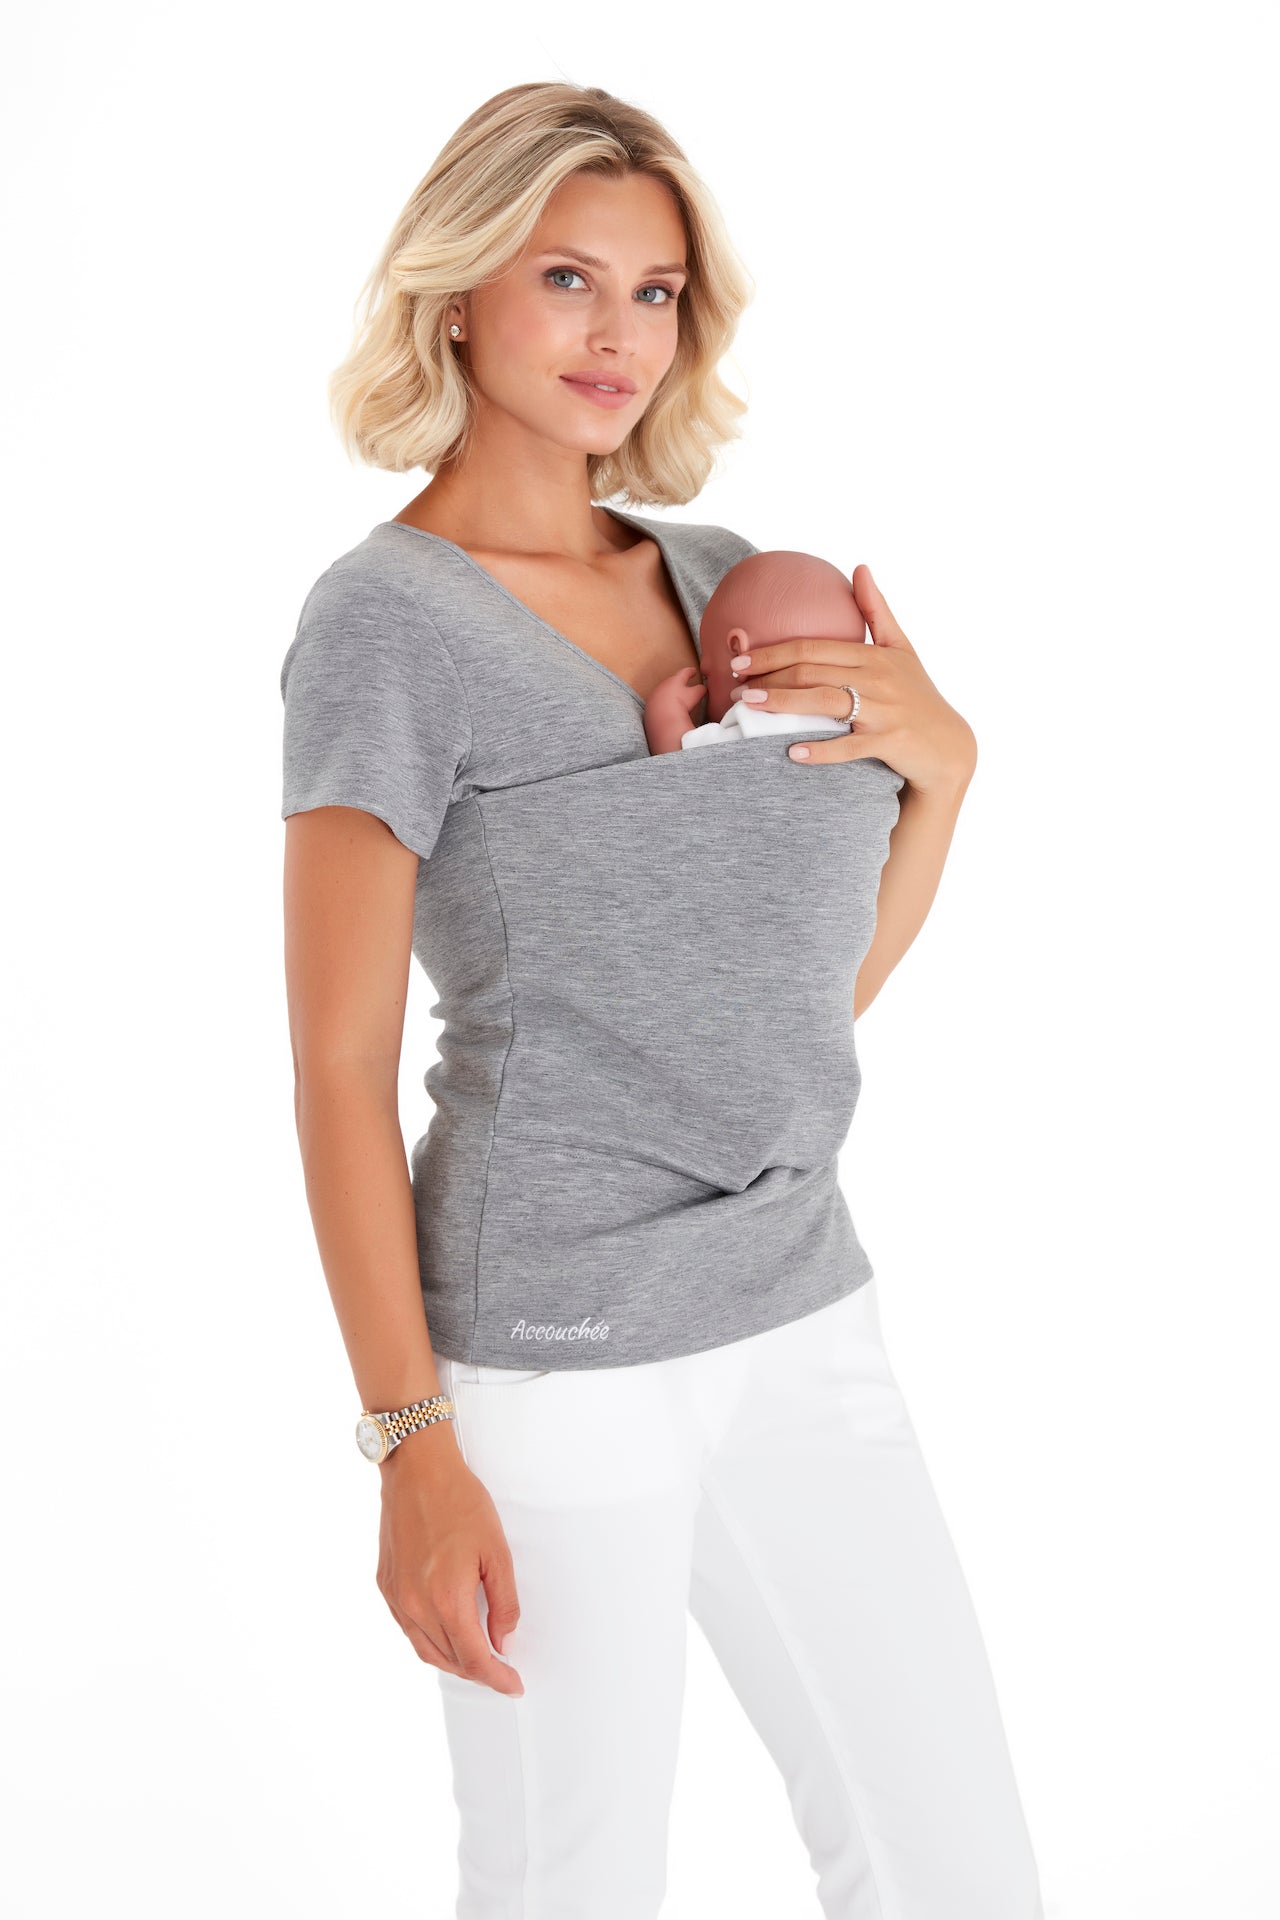 Hands Free Baby Carrier Maternity/Nursing Top